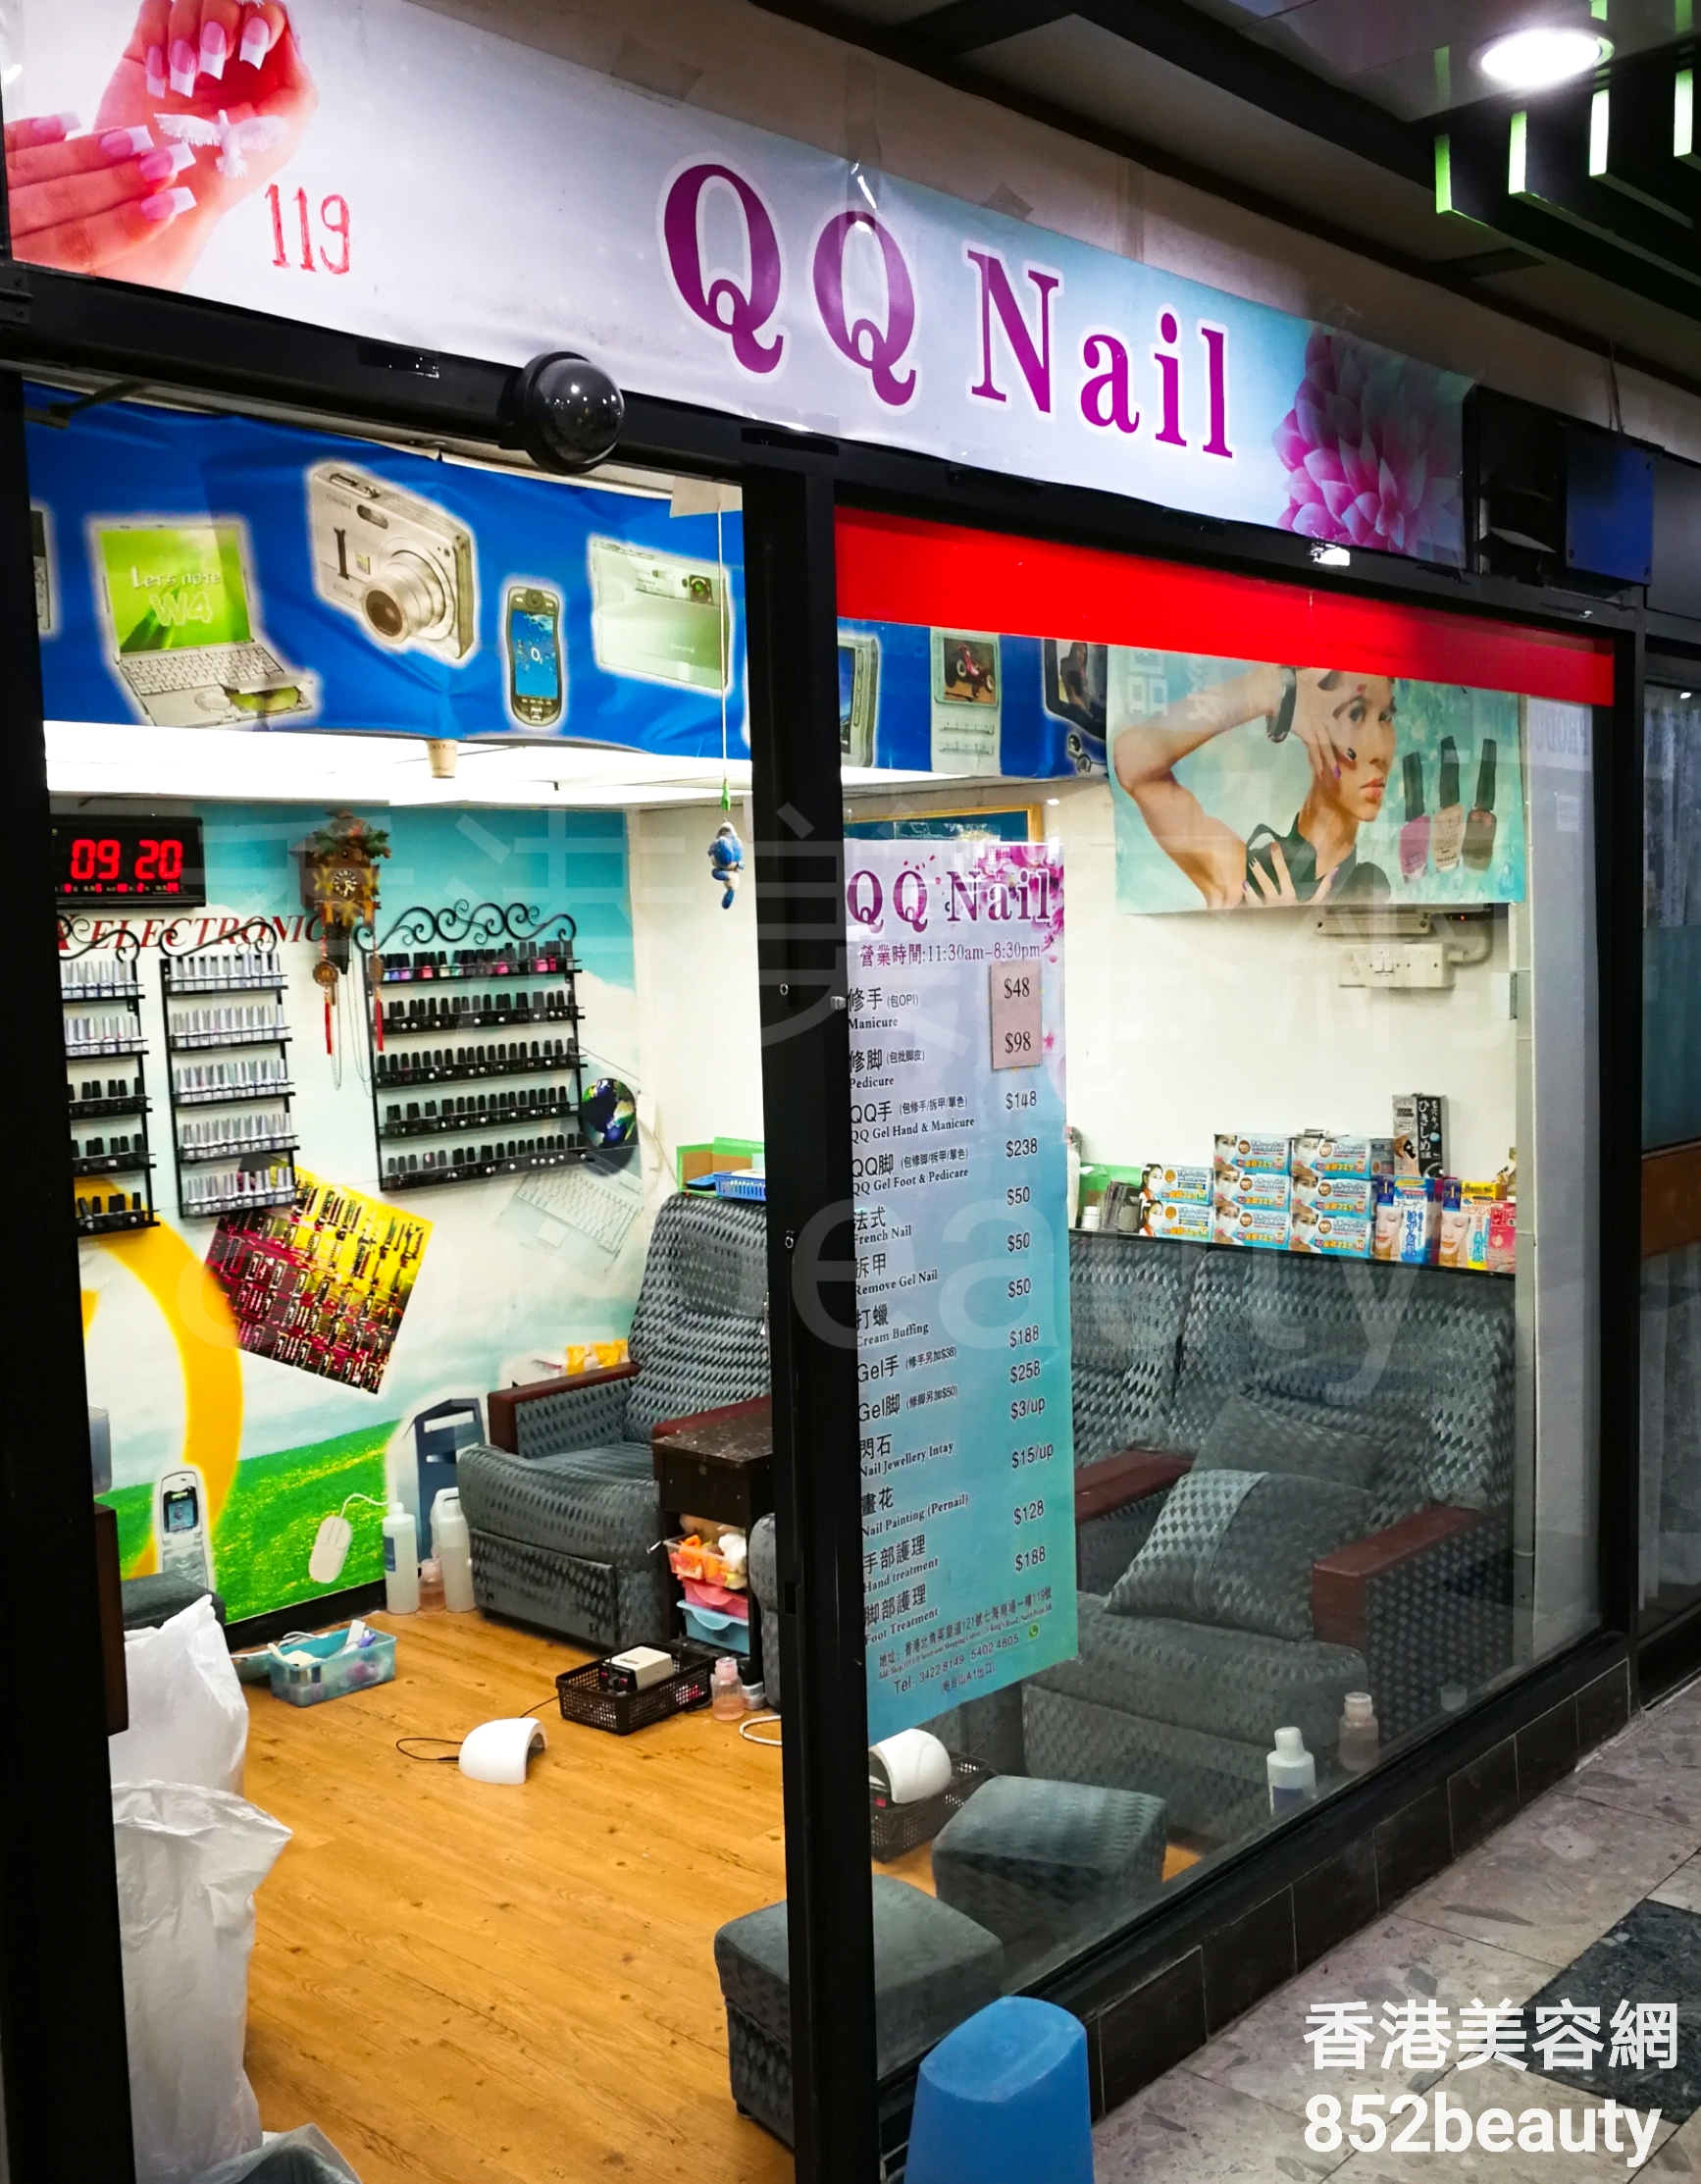 Hand and foot care: QQ Nail